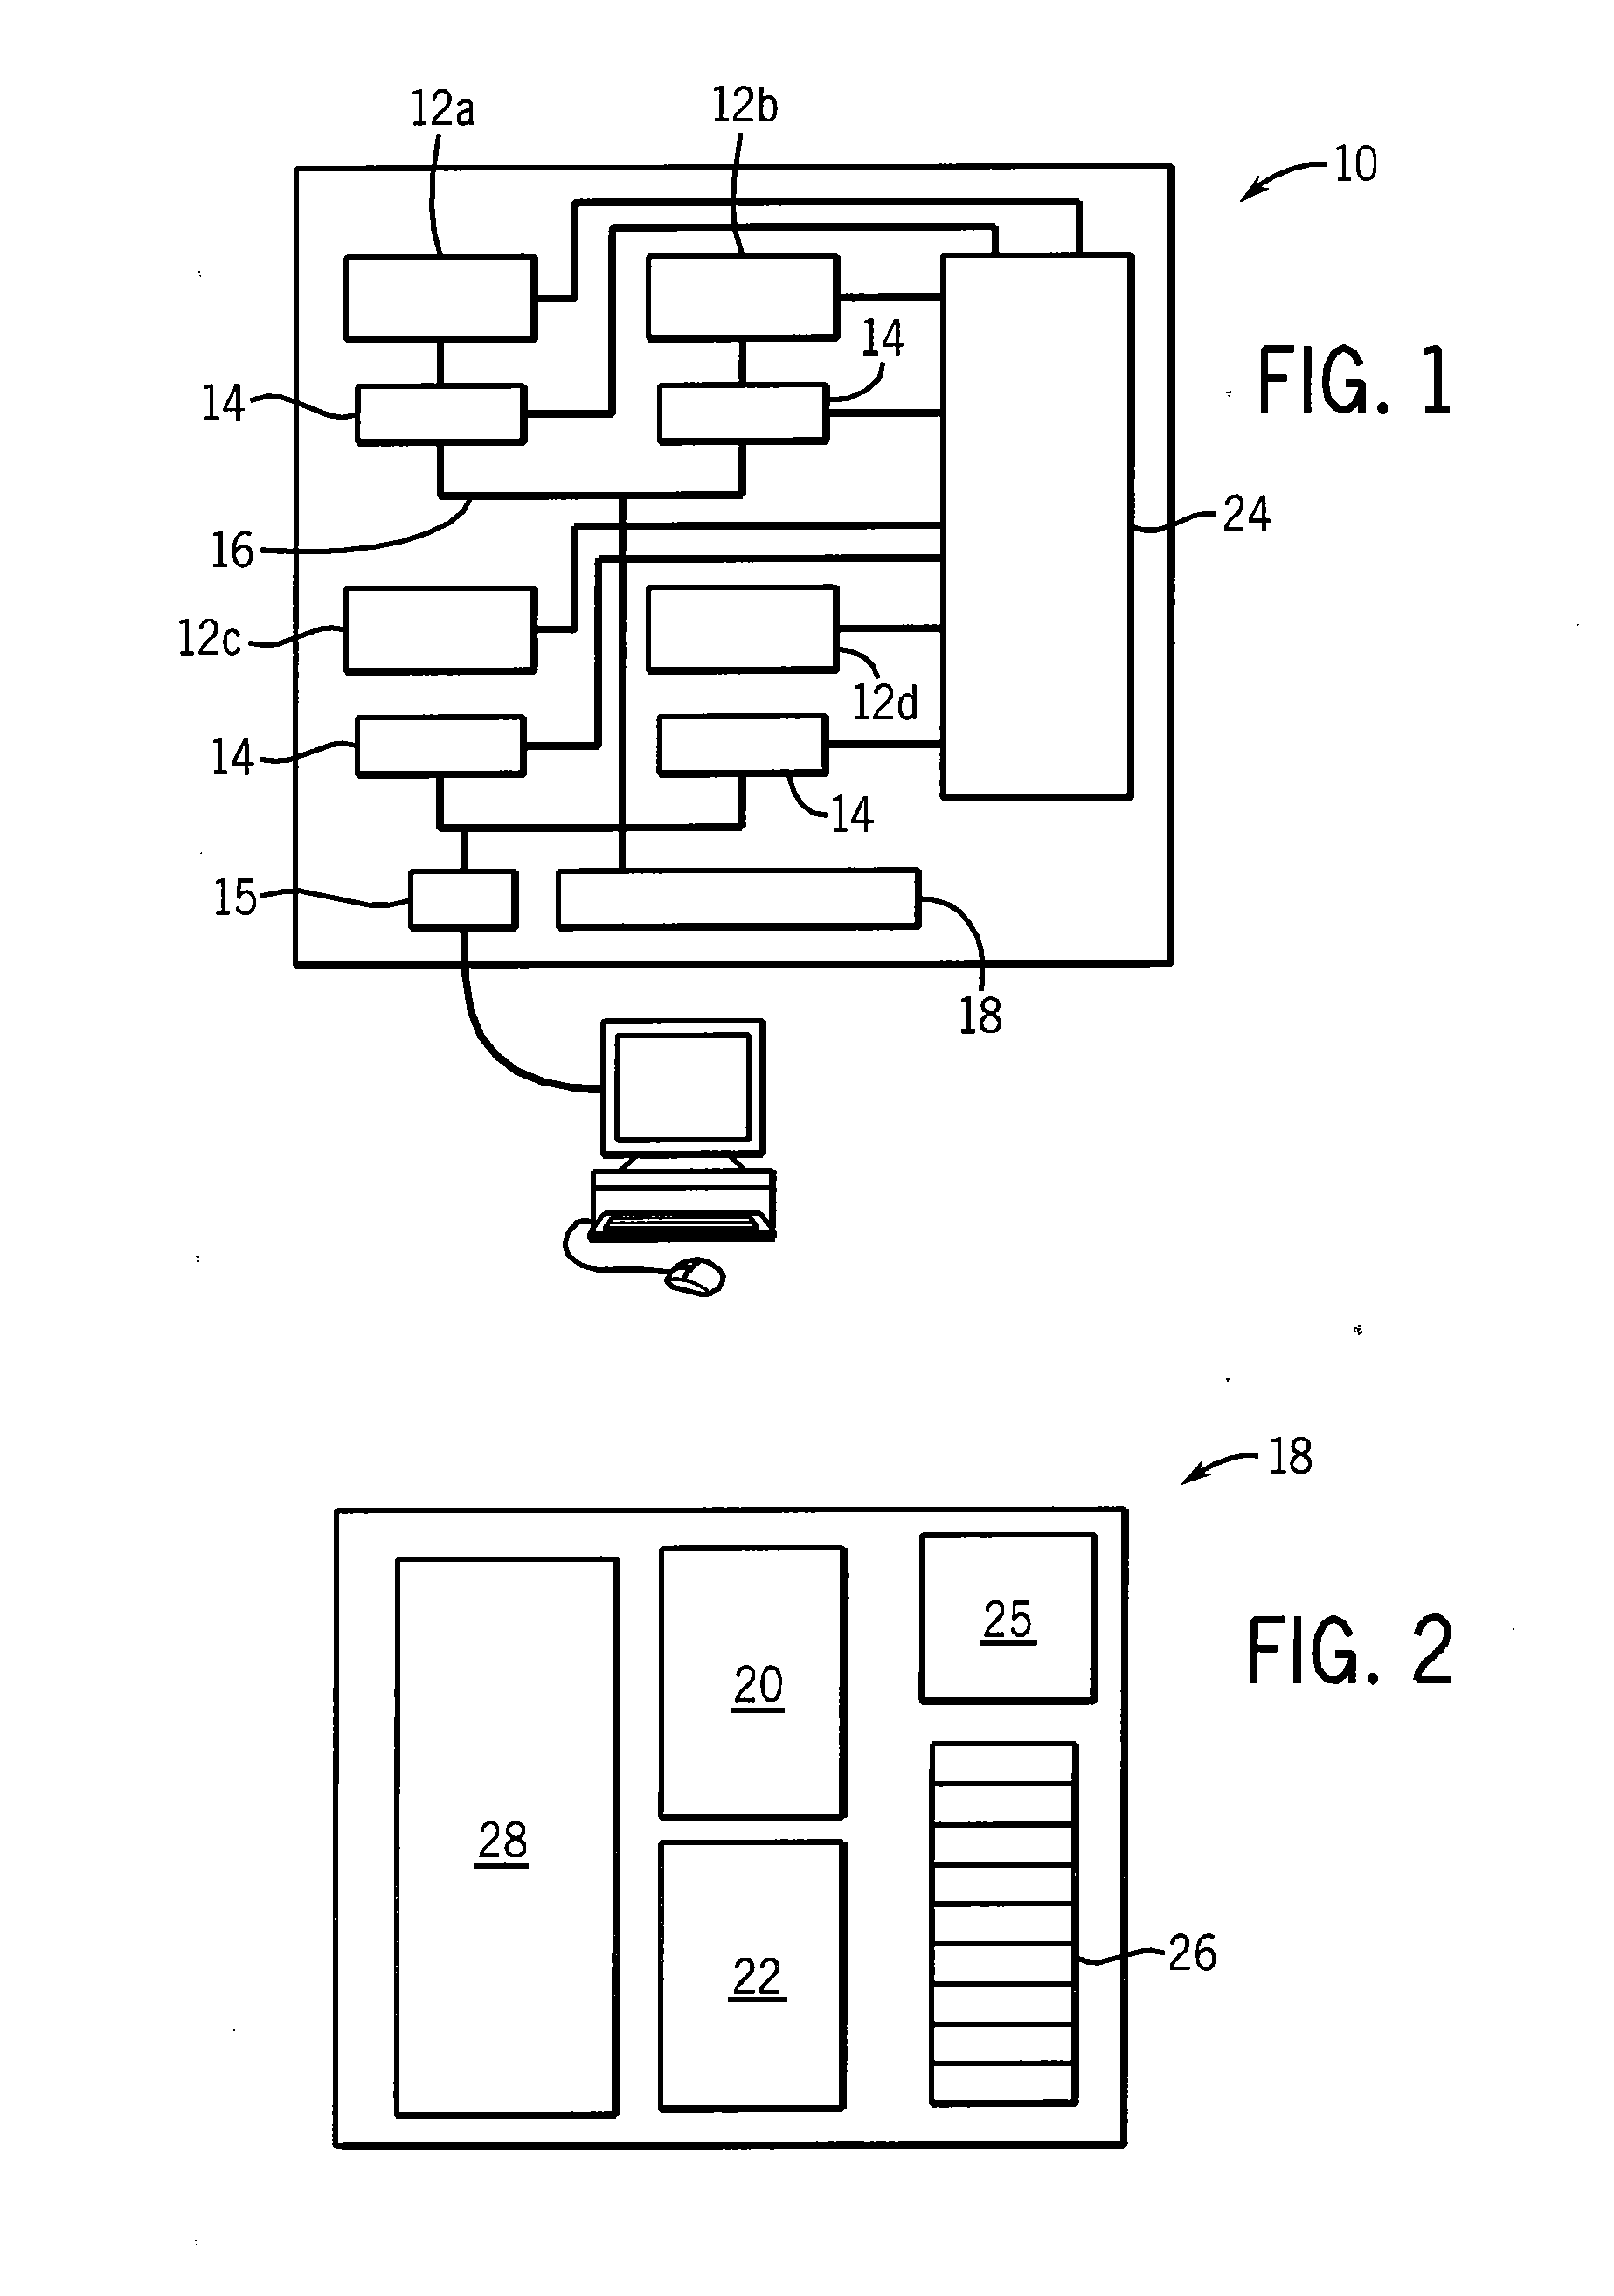 System and Method for Controlling Excessive Parallelism in Multiprocessor Systems